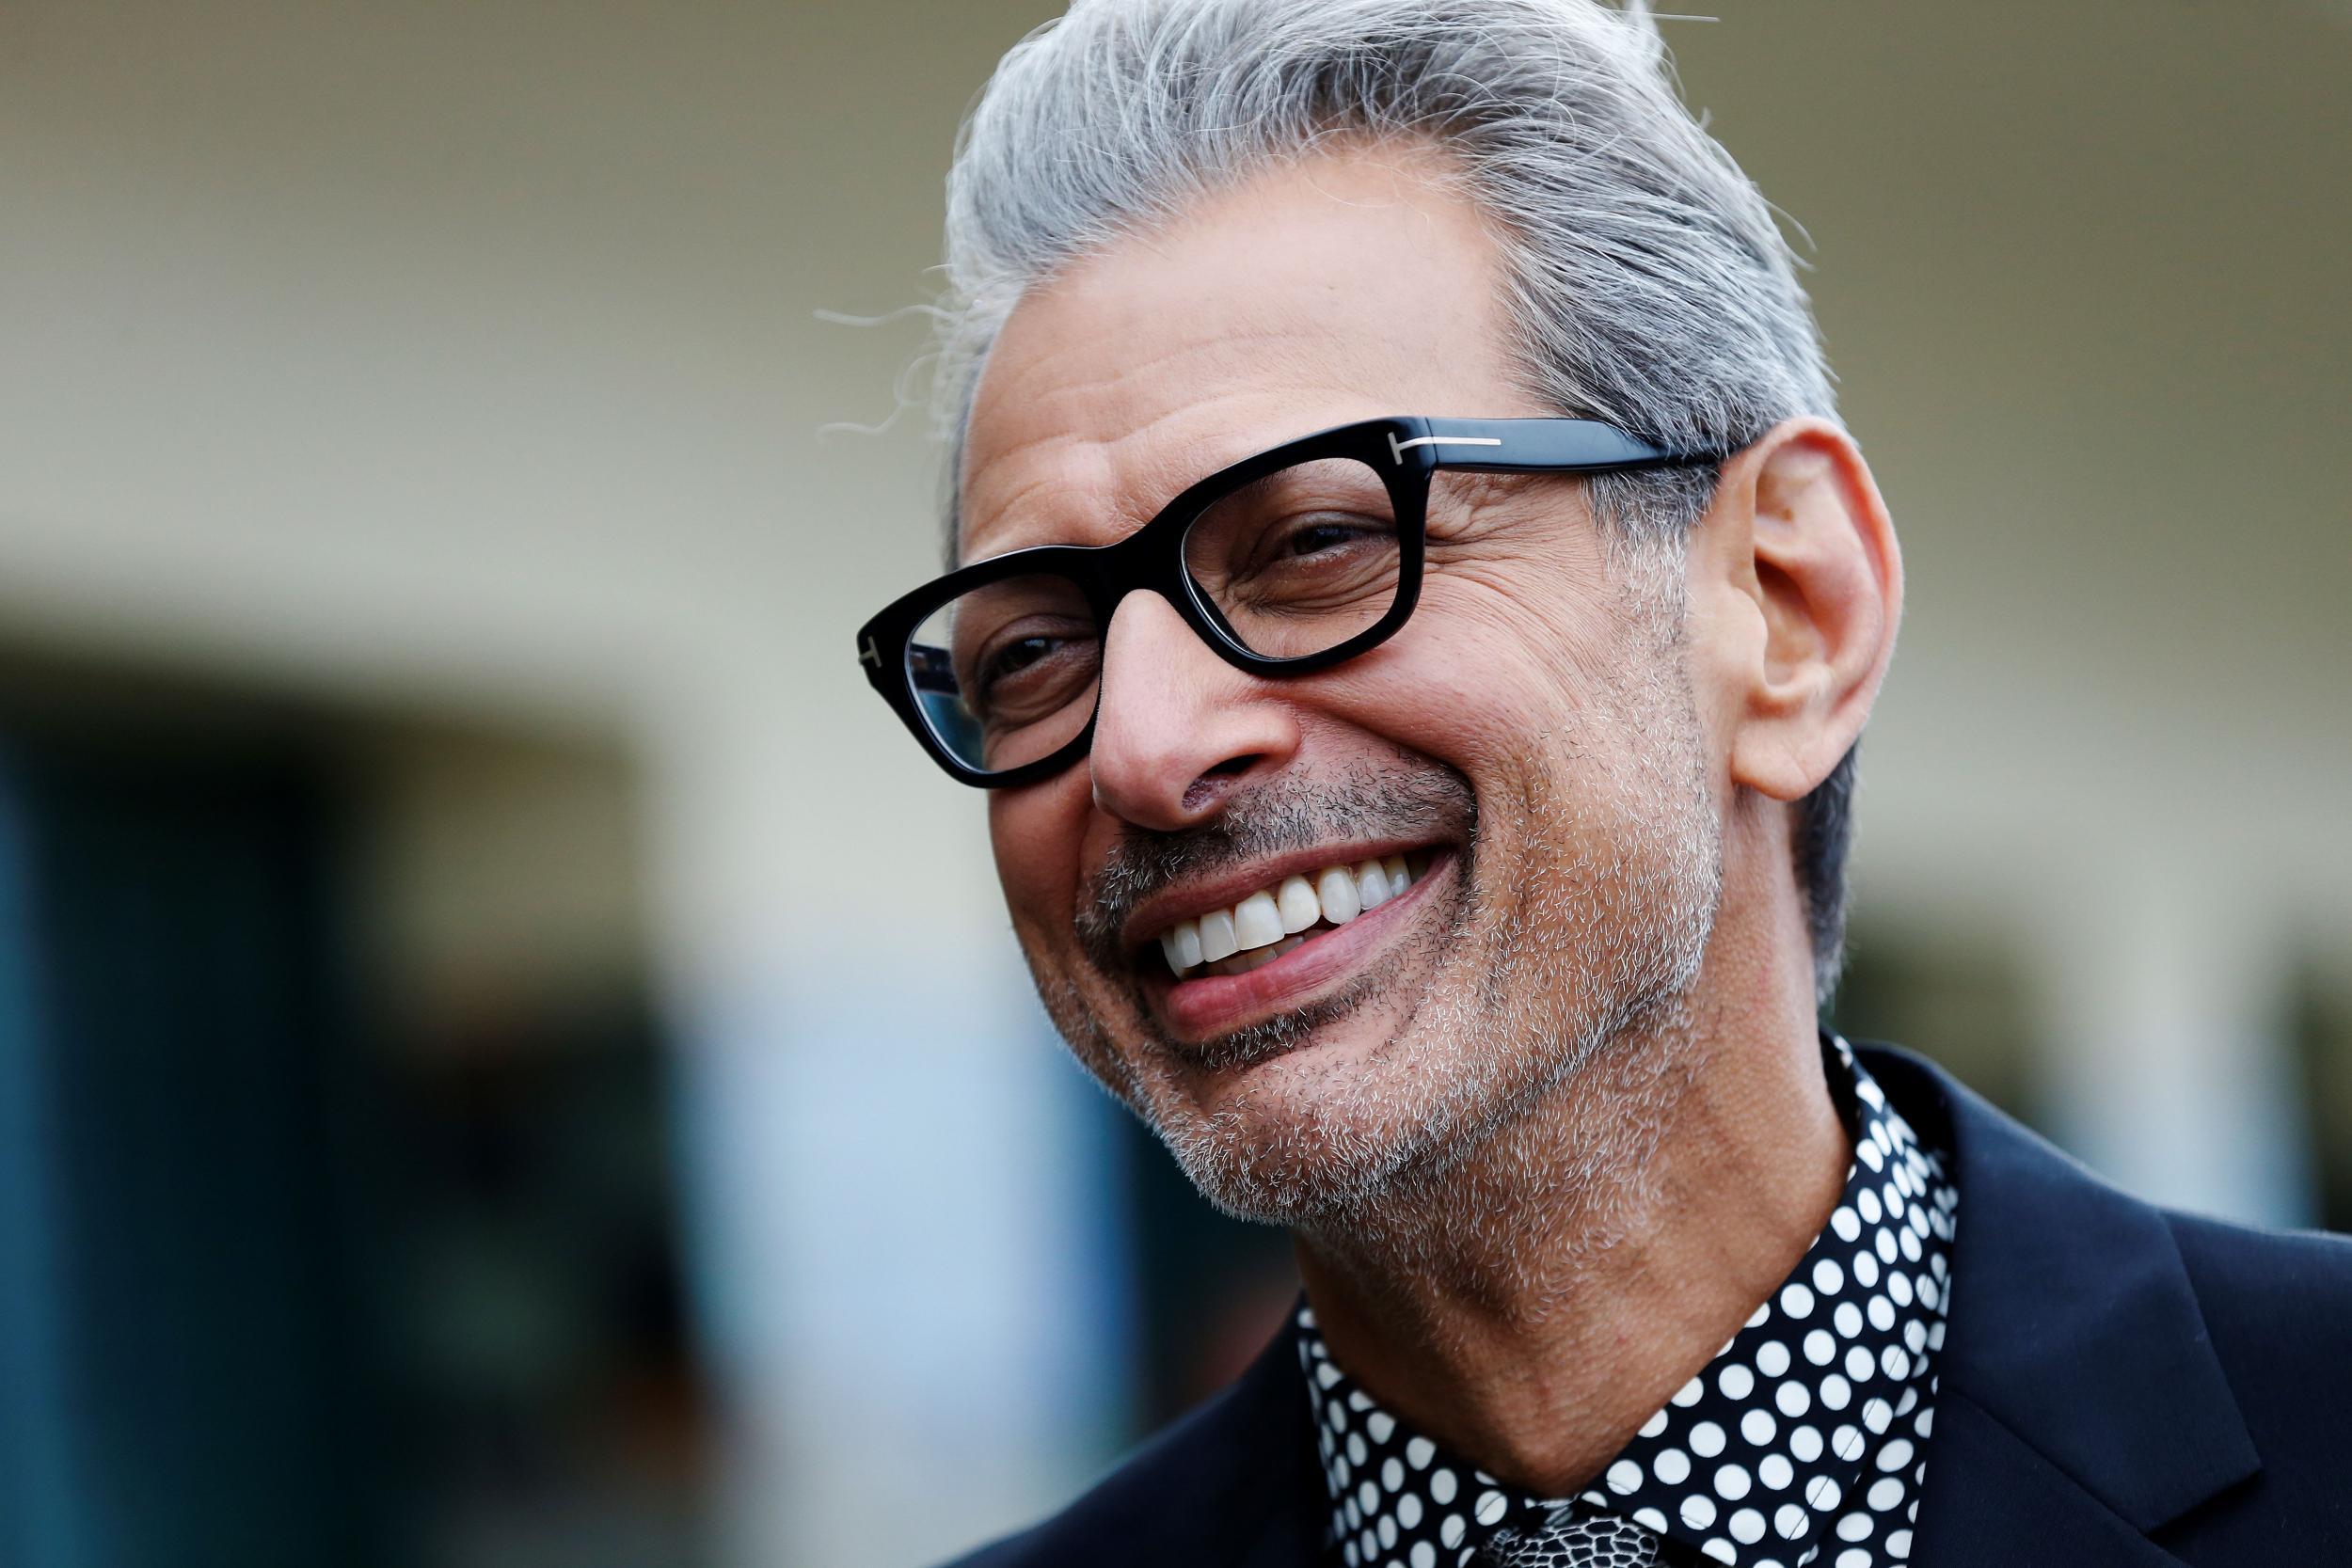 An excited Goldblum feels ‘full of vim, vigour, and vitamin A… if that’s the right vitamin’ (Getty)